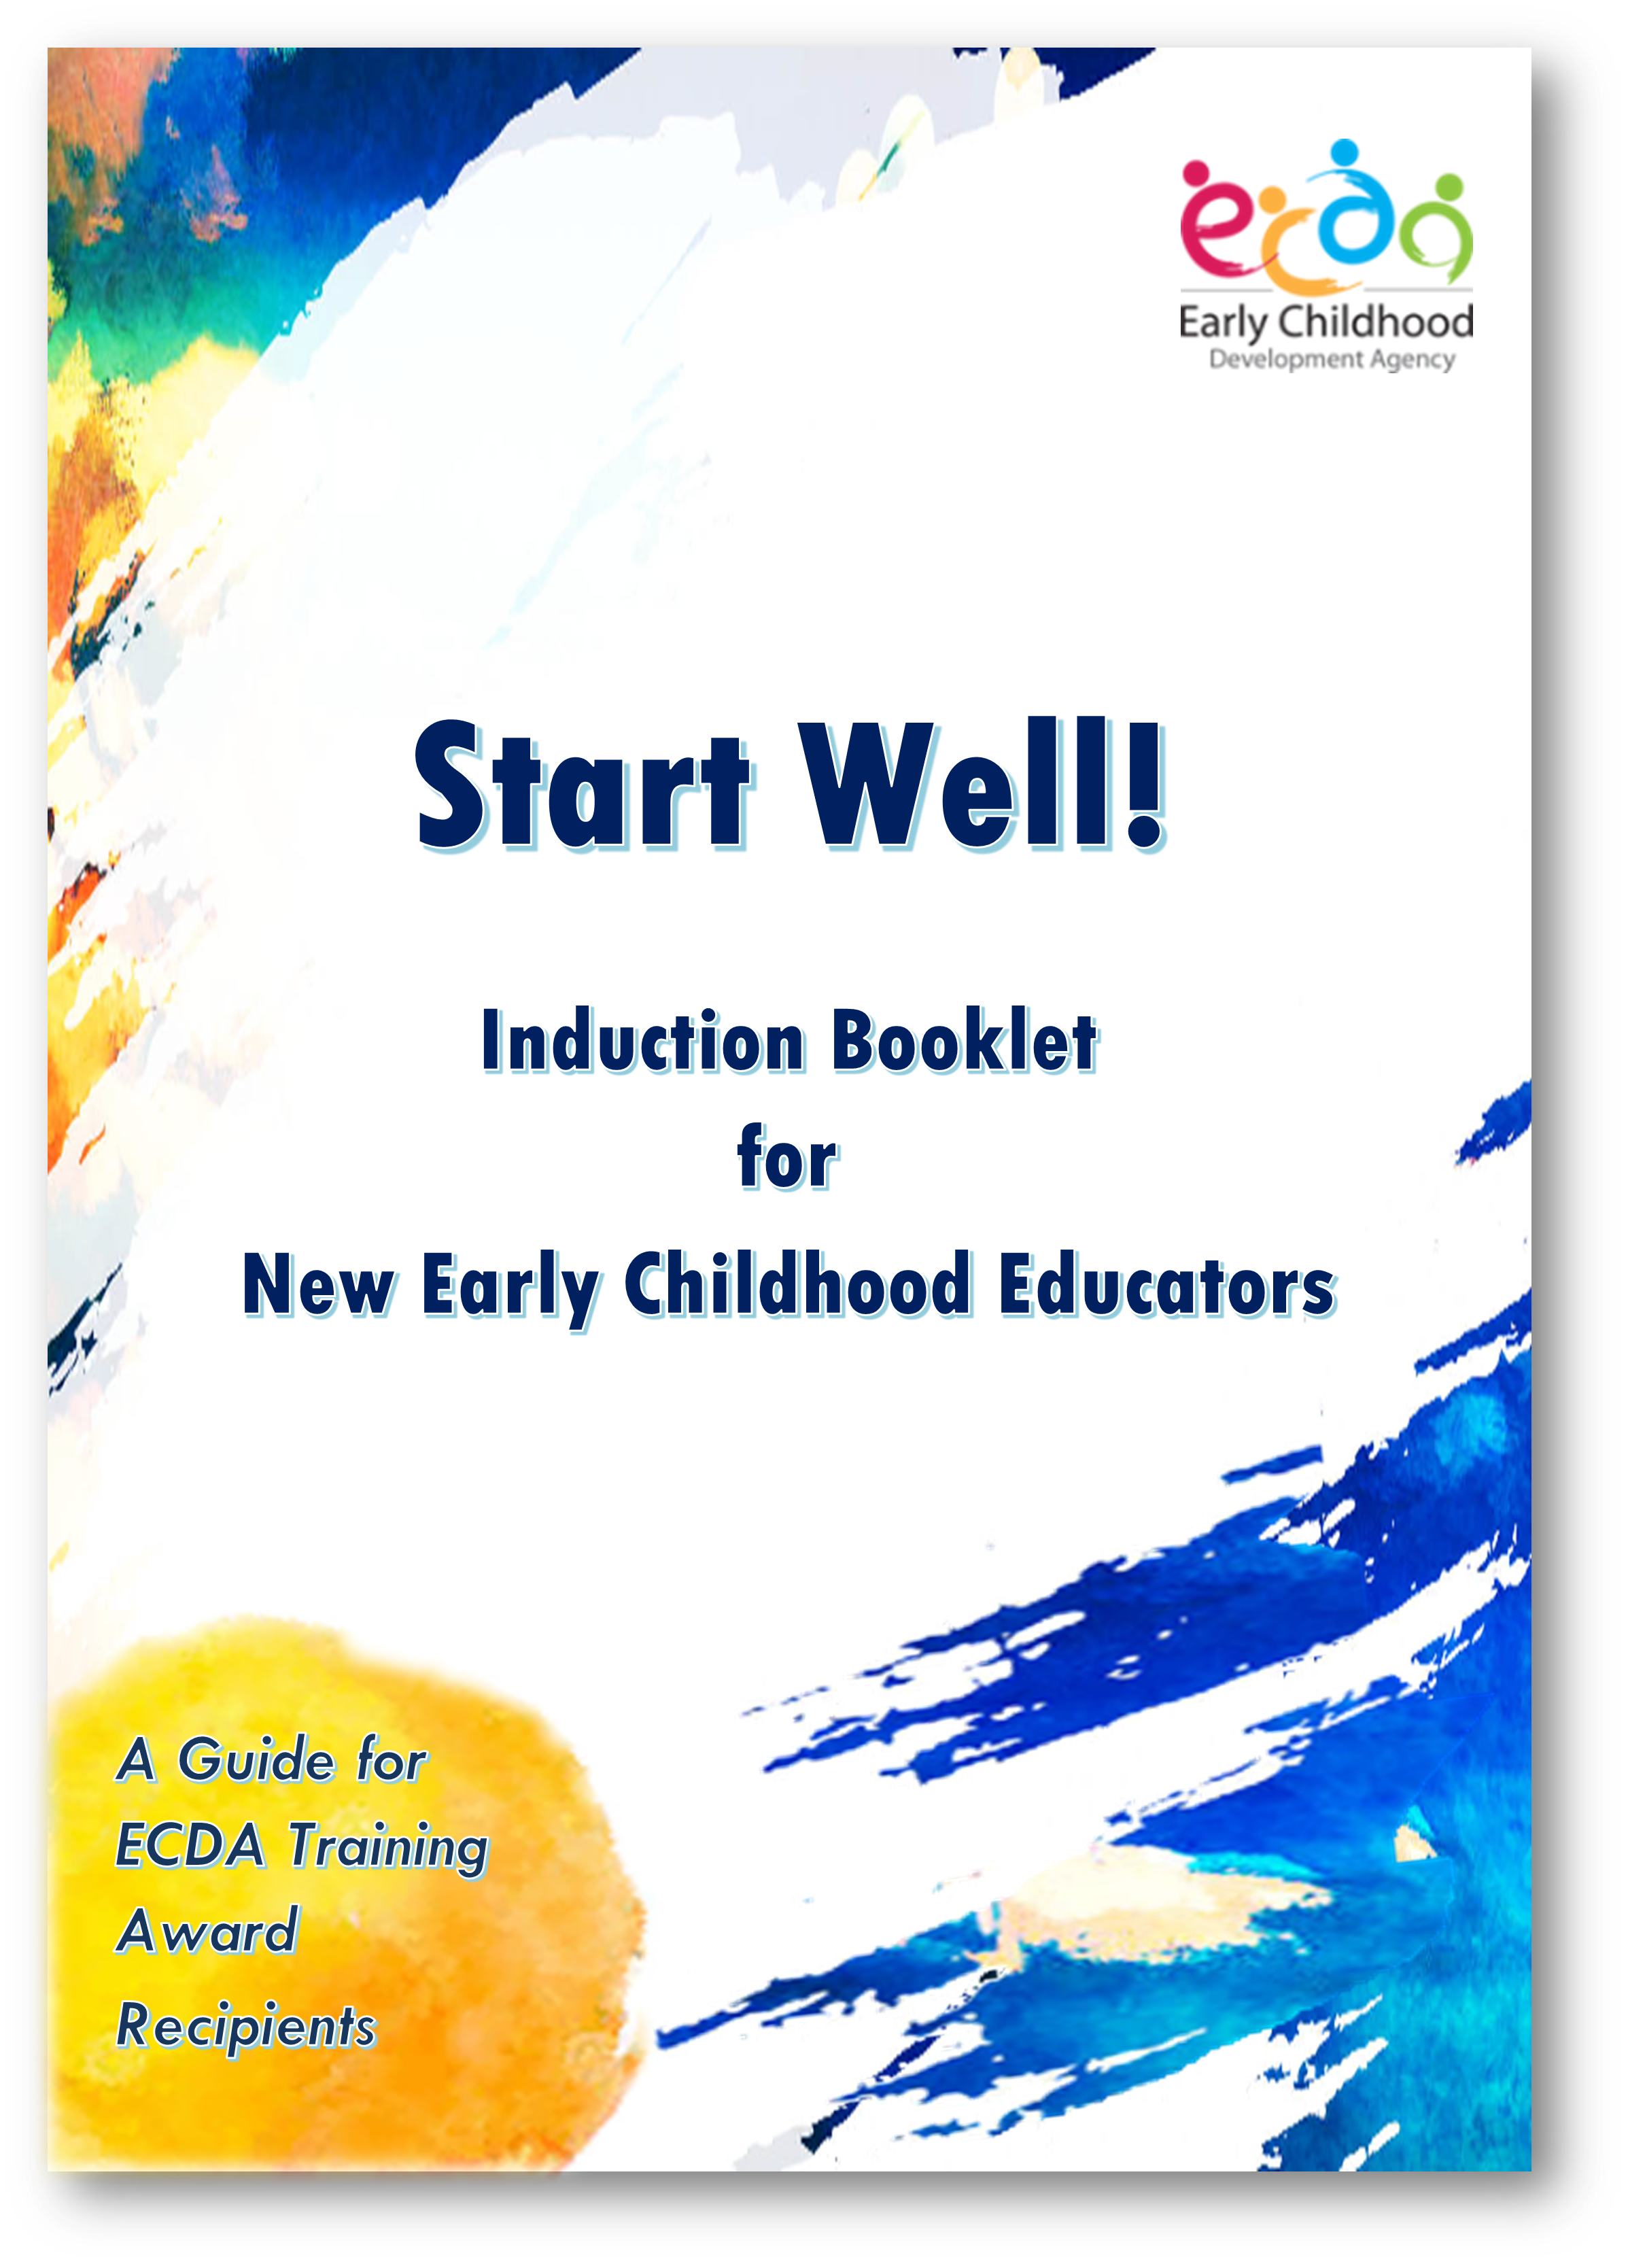 Induction Booklet for New Early Childhood Educators